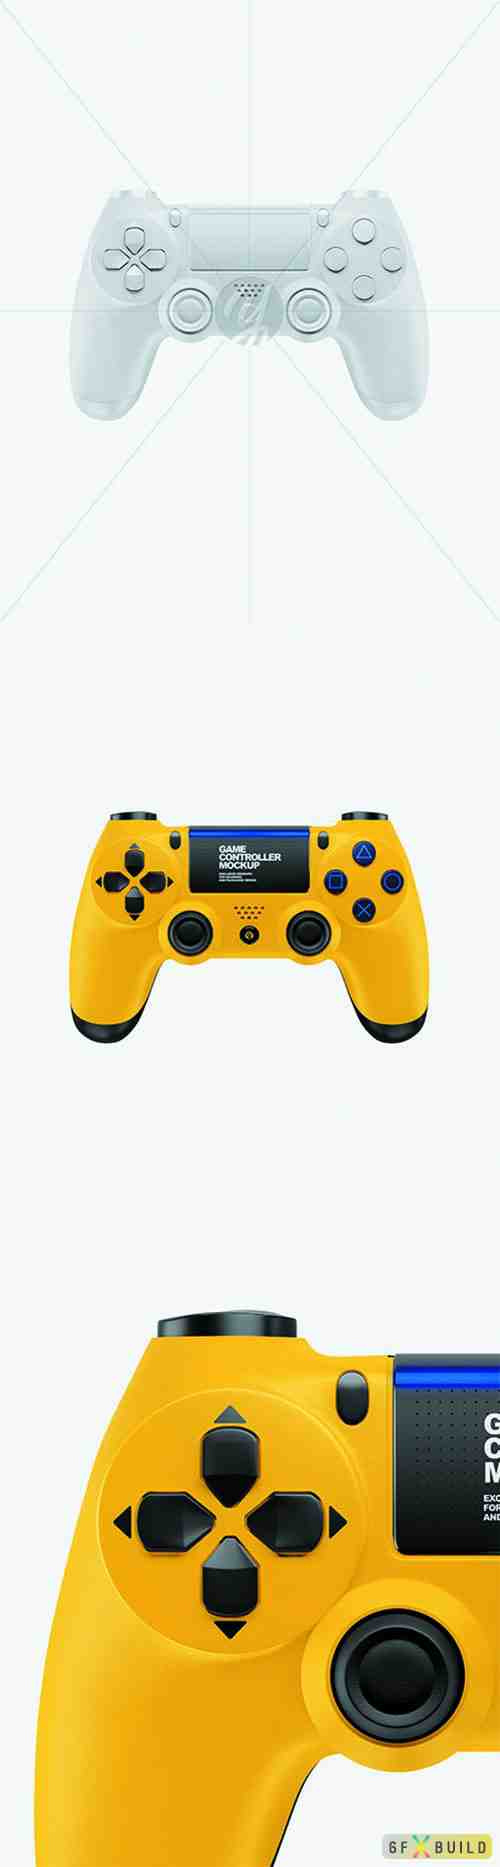 Game Controller Mockup - Front View 62859 TIF